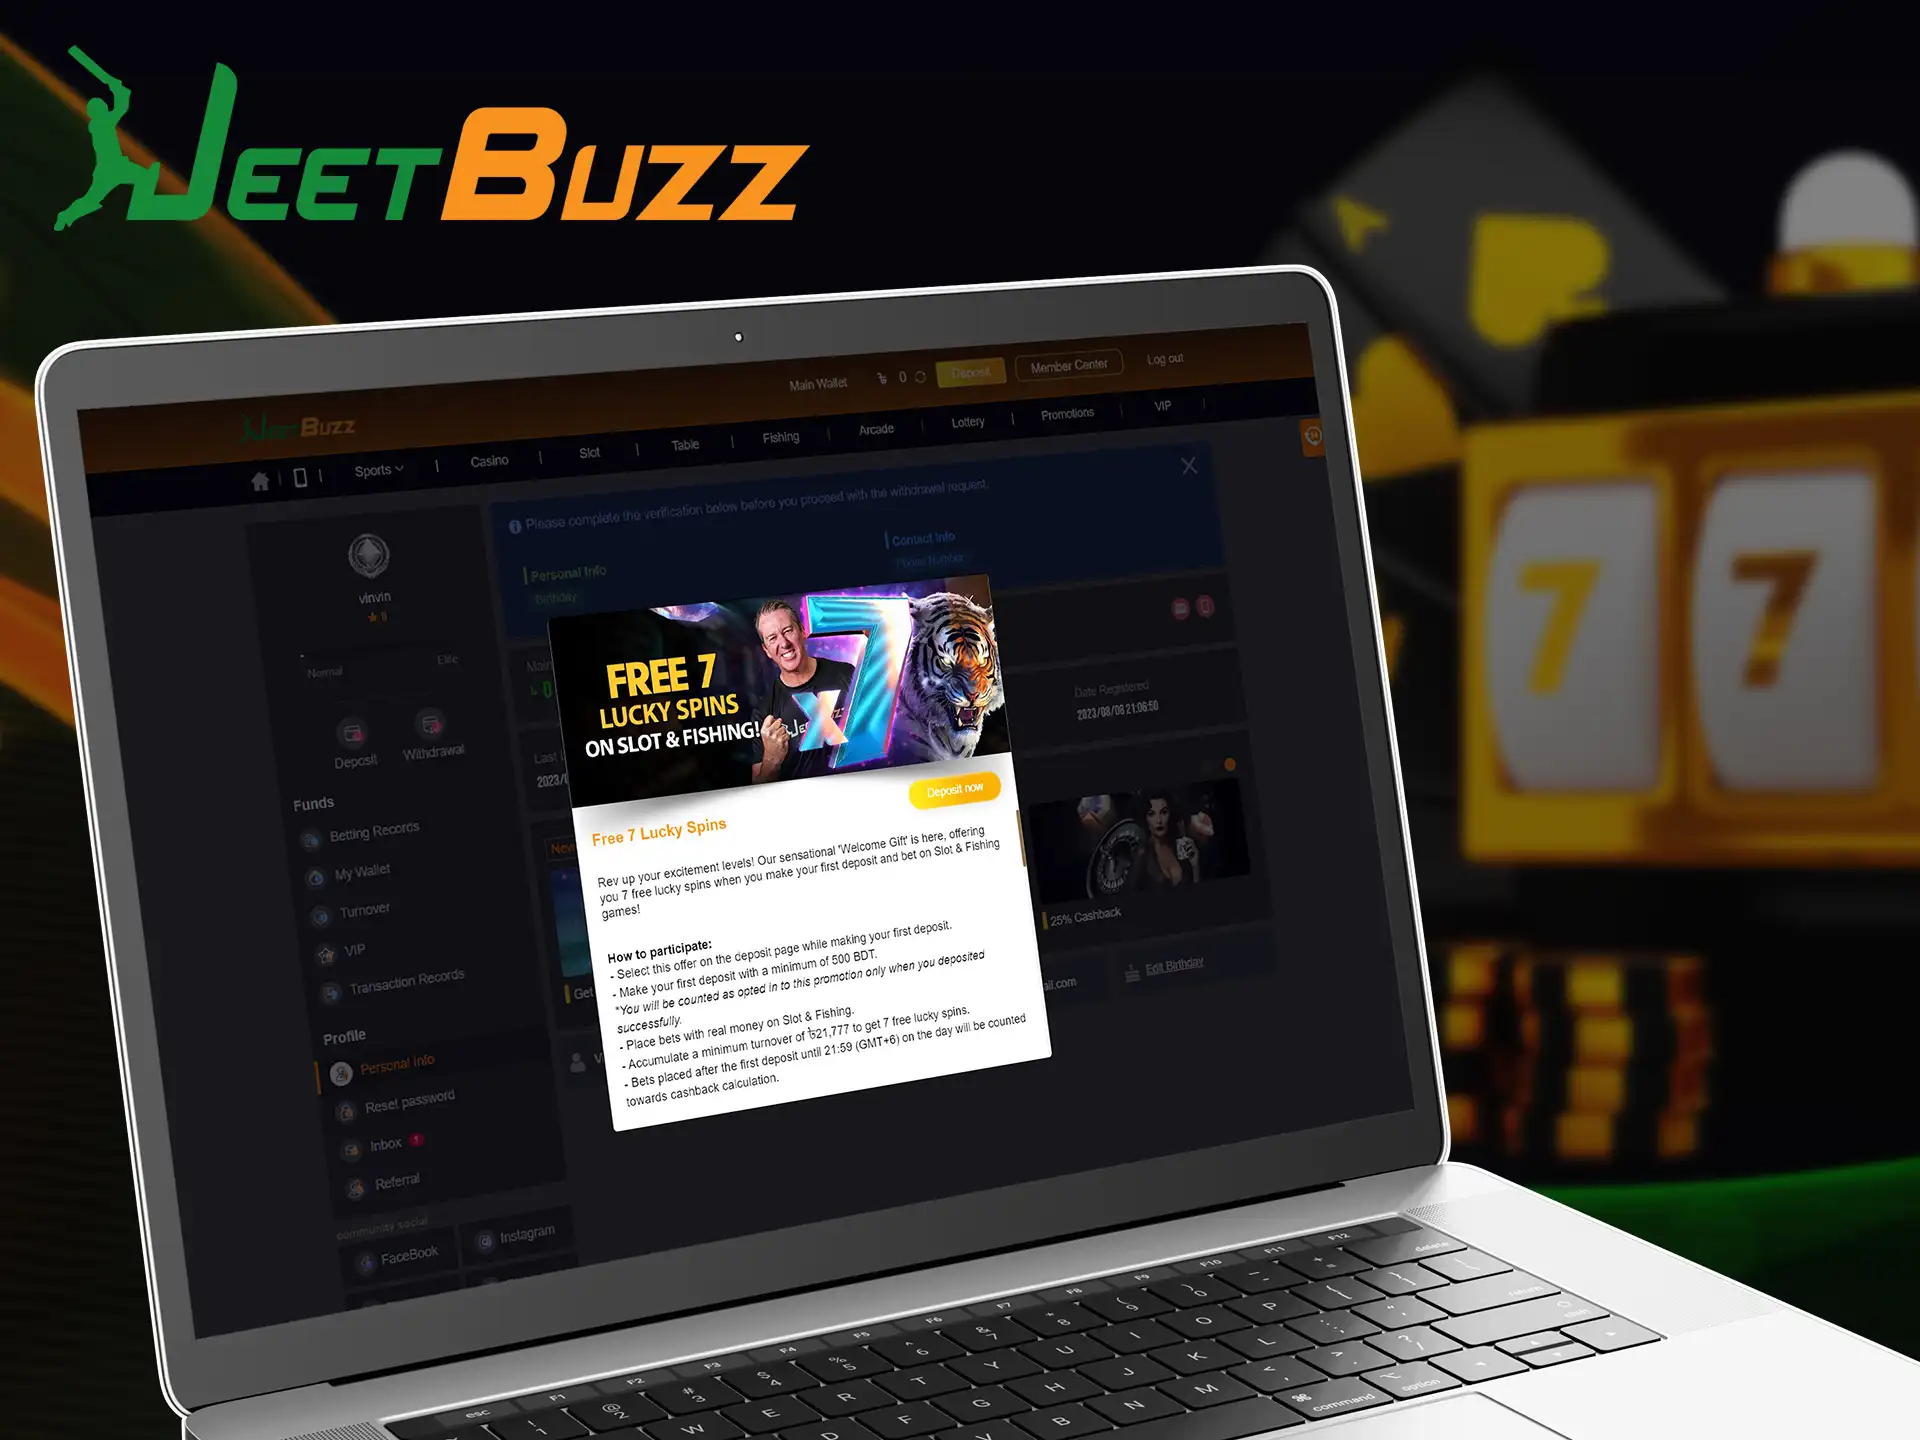 Make your deposit at JeetBuzz to get free 7 lucky spins.